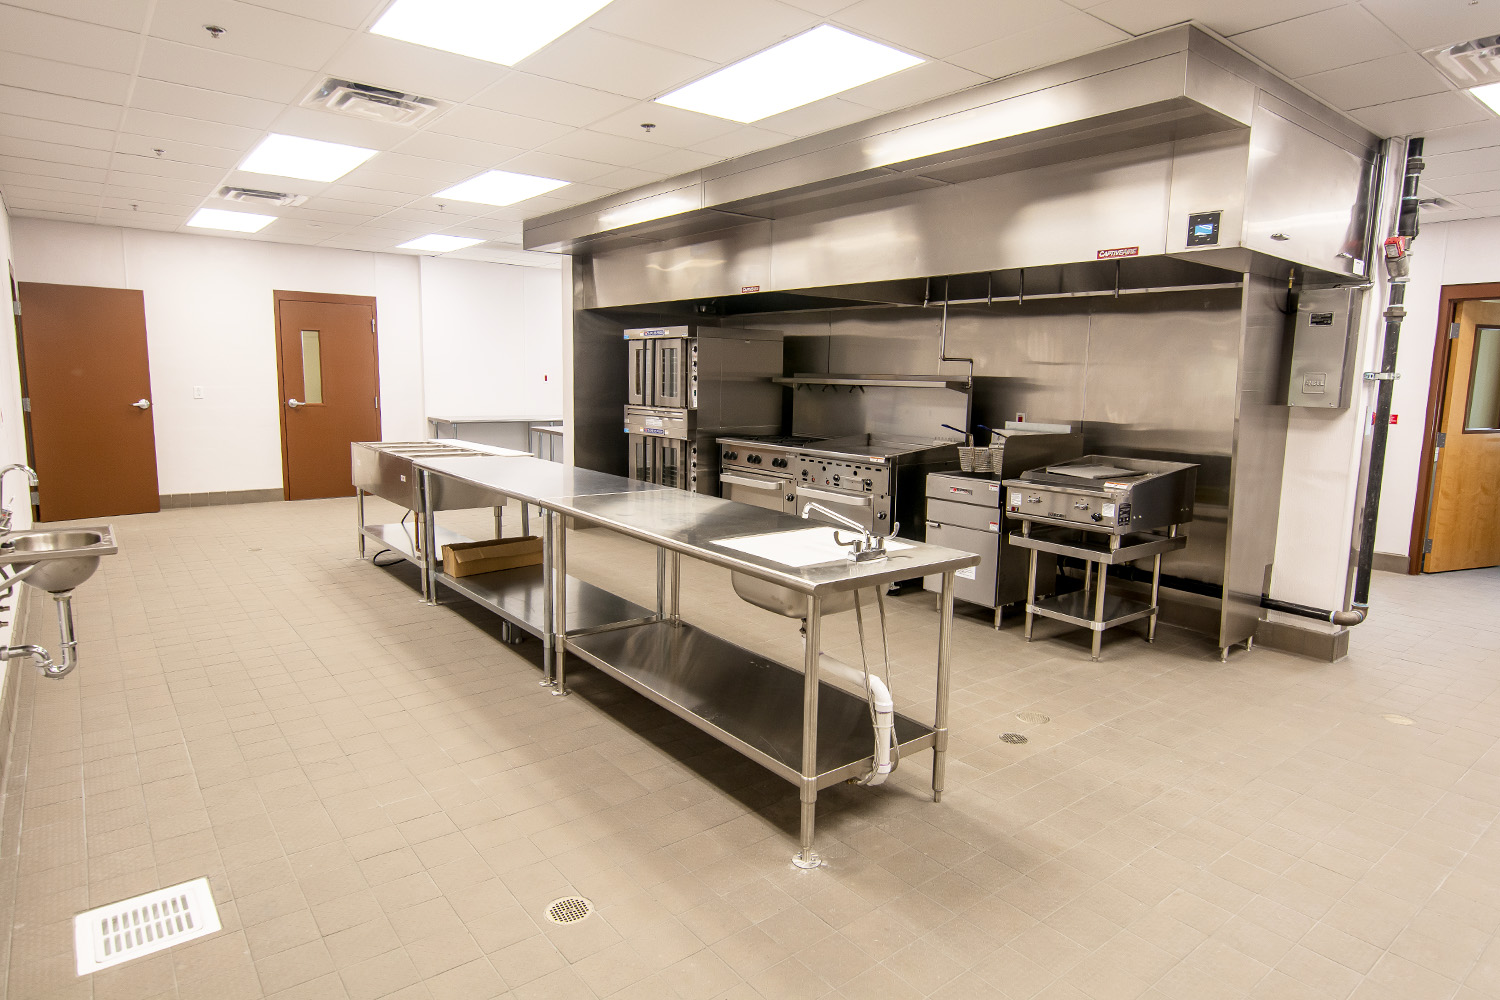 Food prep area with new stainless kitchen equipment